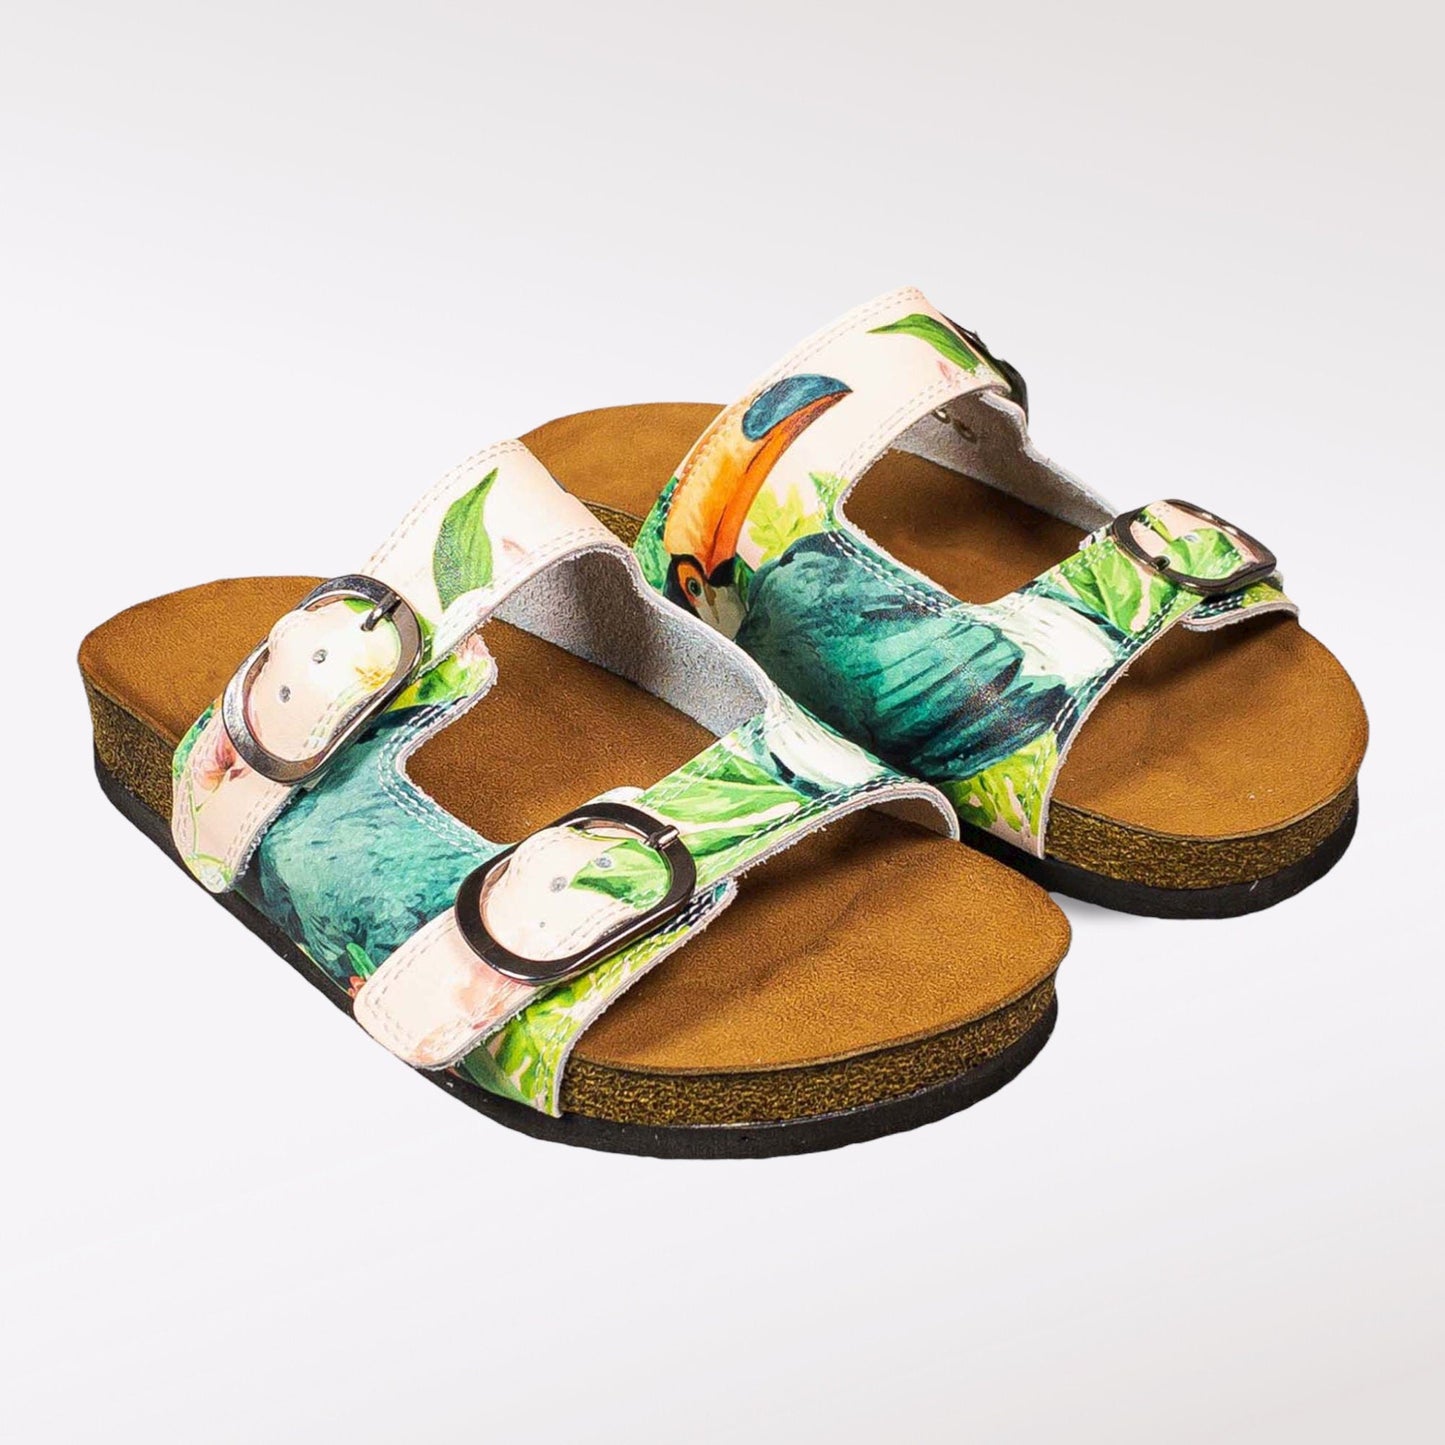 Tropical Leather Open Toe Sandals Clogs Slippers